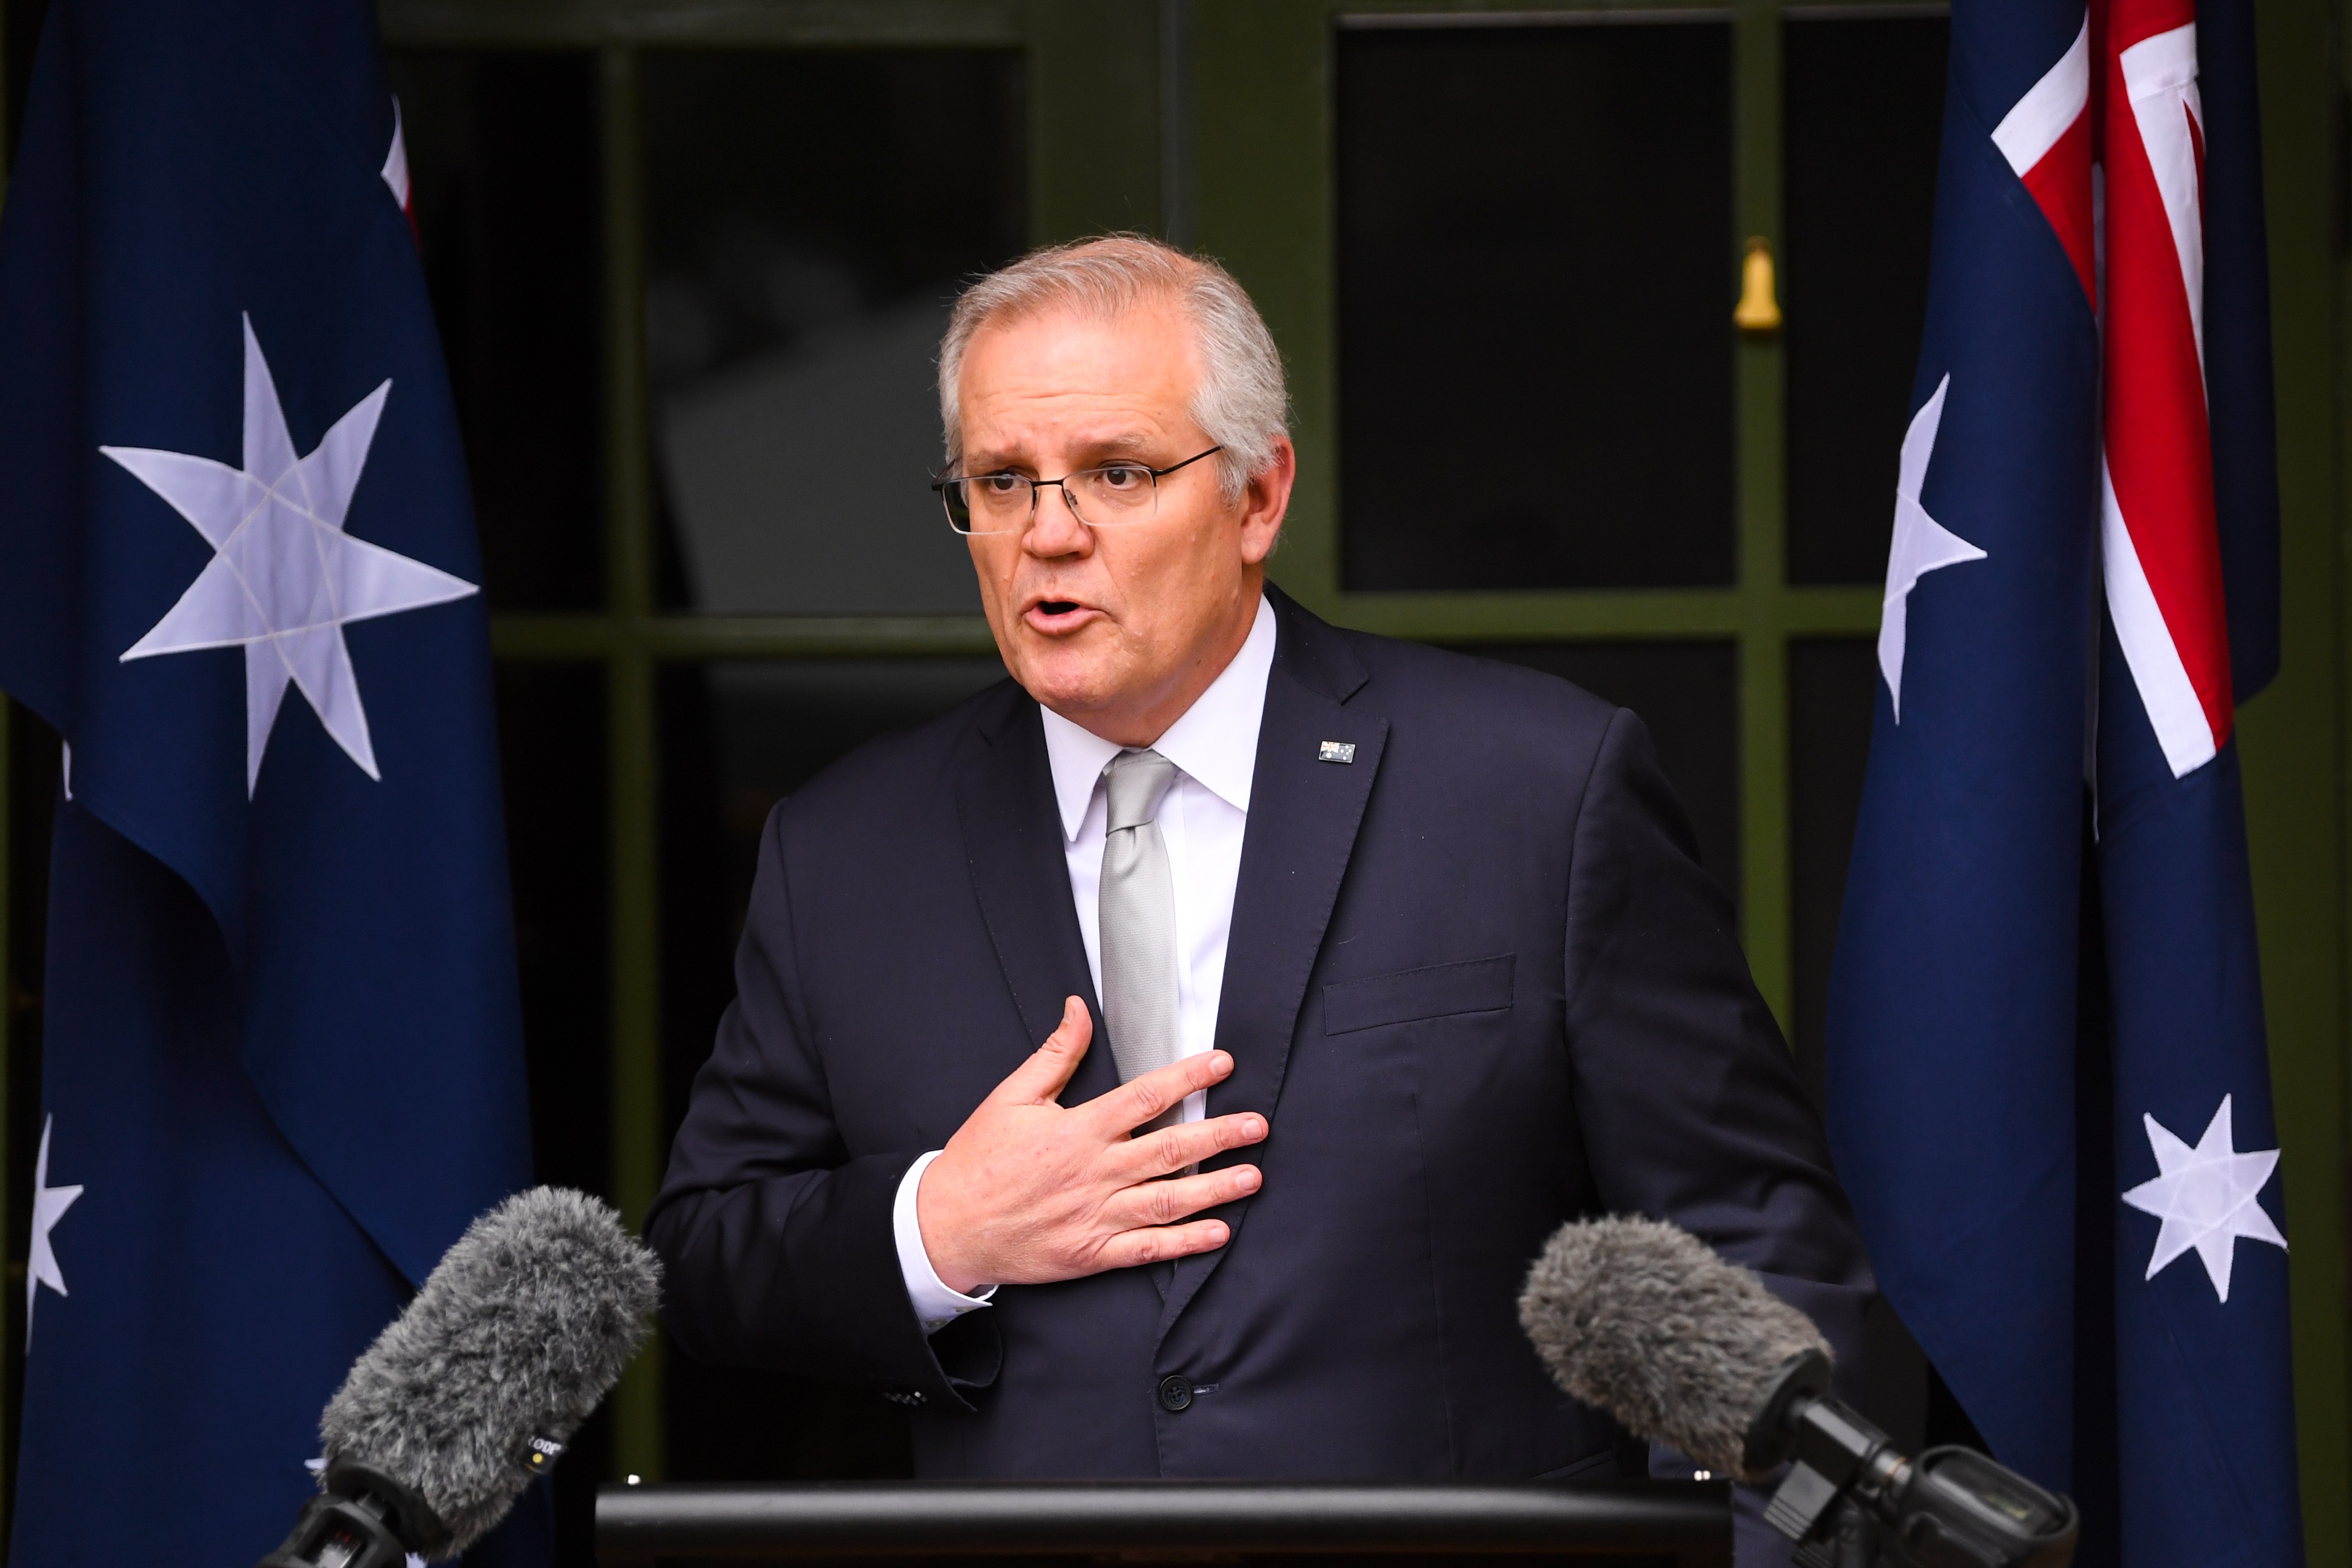 Prime Minister Scott Morrison speaks to the media during a press conference at the Lodge in Canberra.